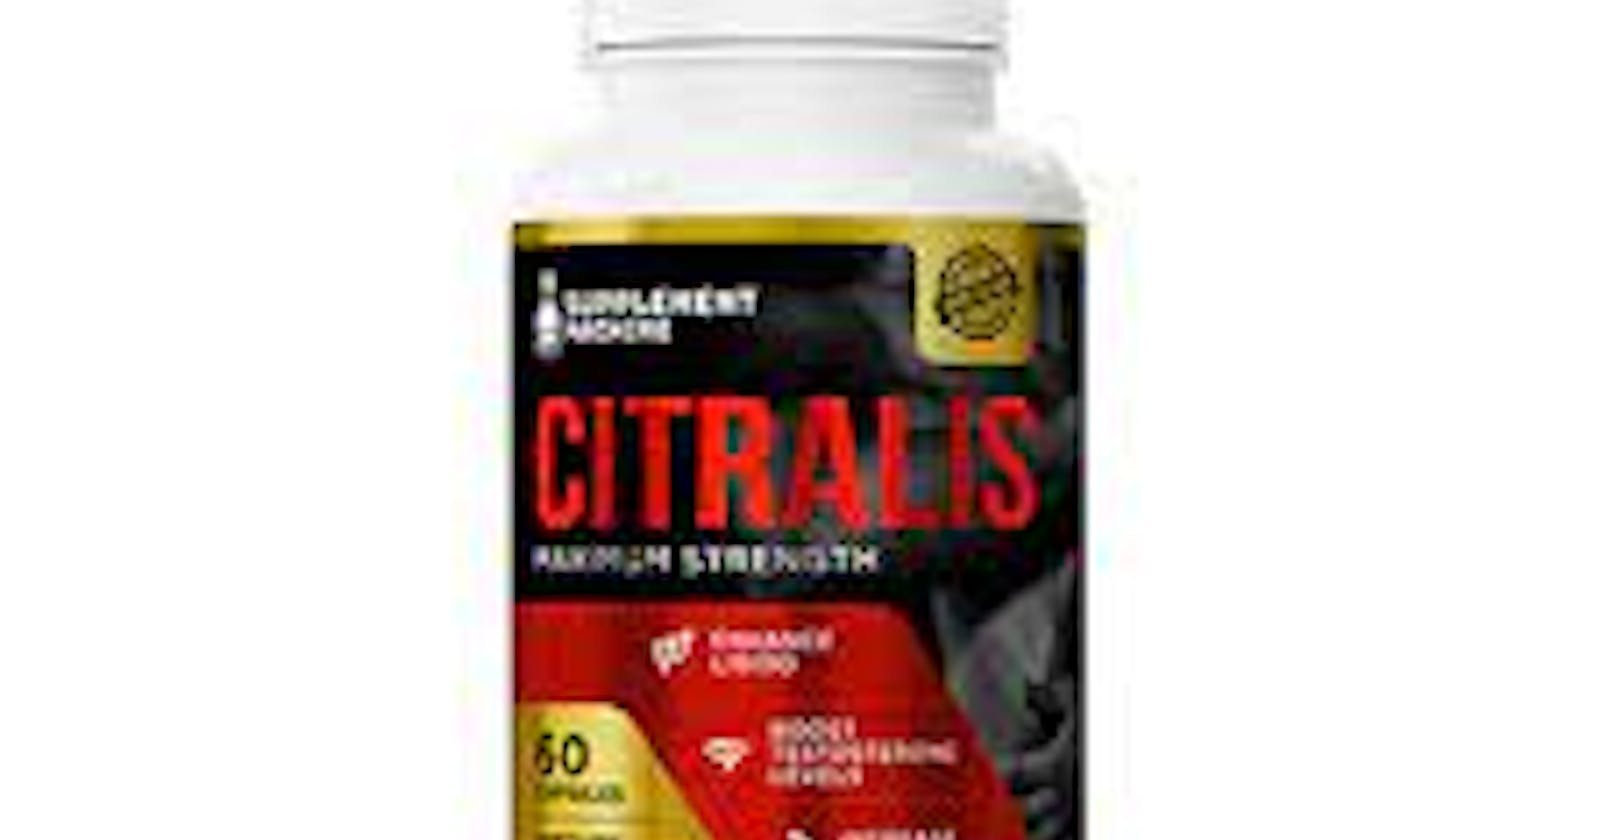 Citralis ME Capsules South Africa [Dis Chem]  : (2024 Fraud Warning) Shocking Result Read Now!